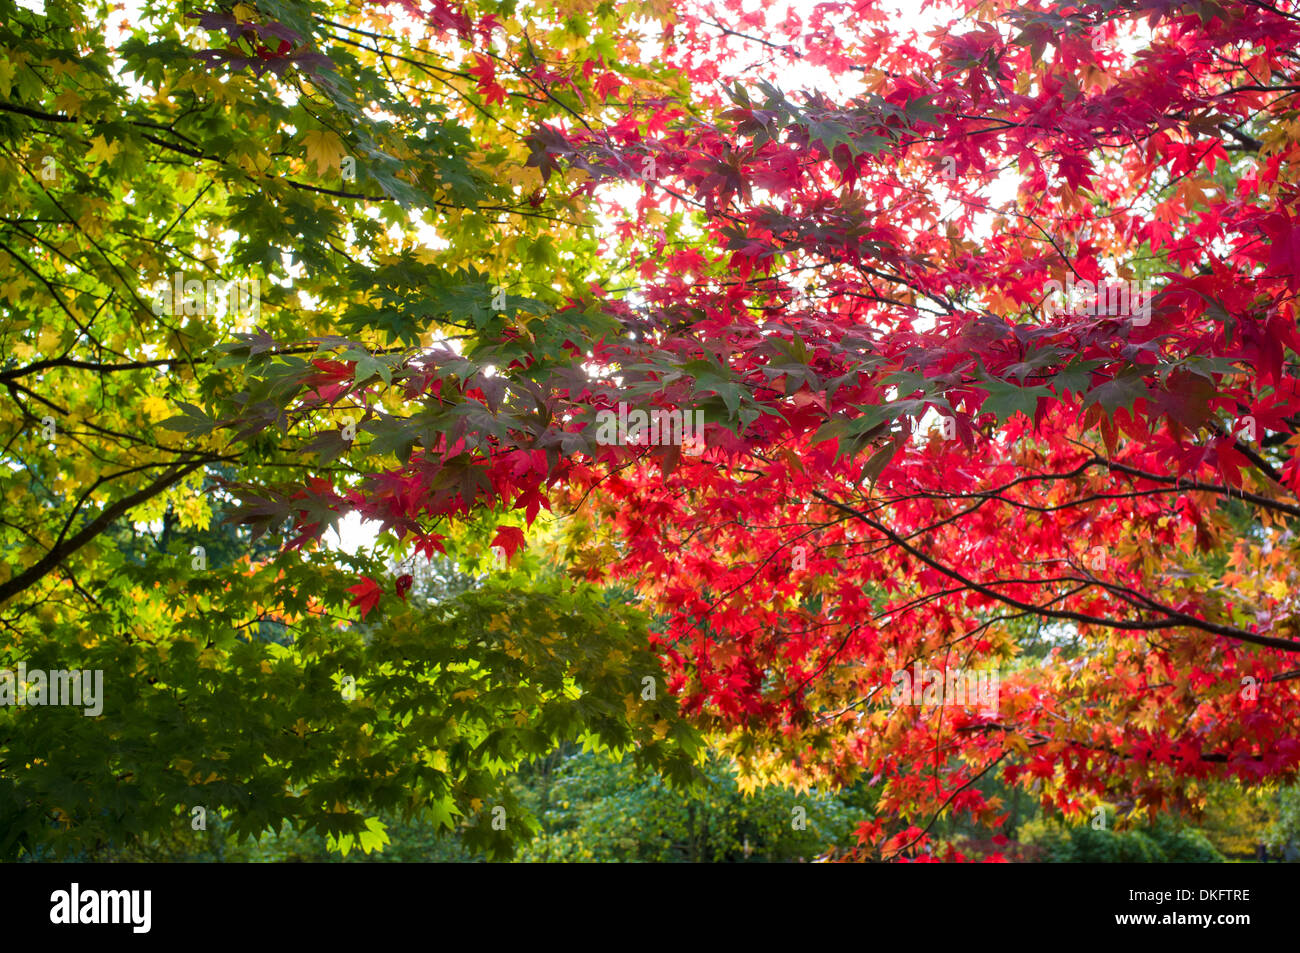 Green and red leaves on trees Stock Photo